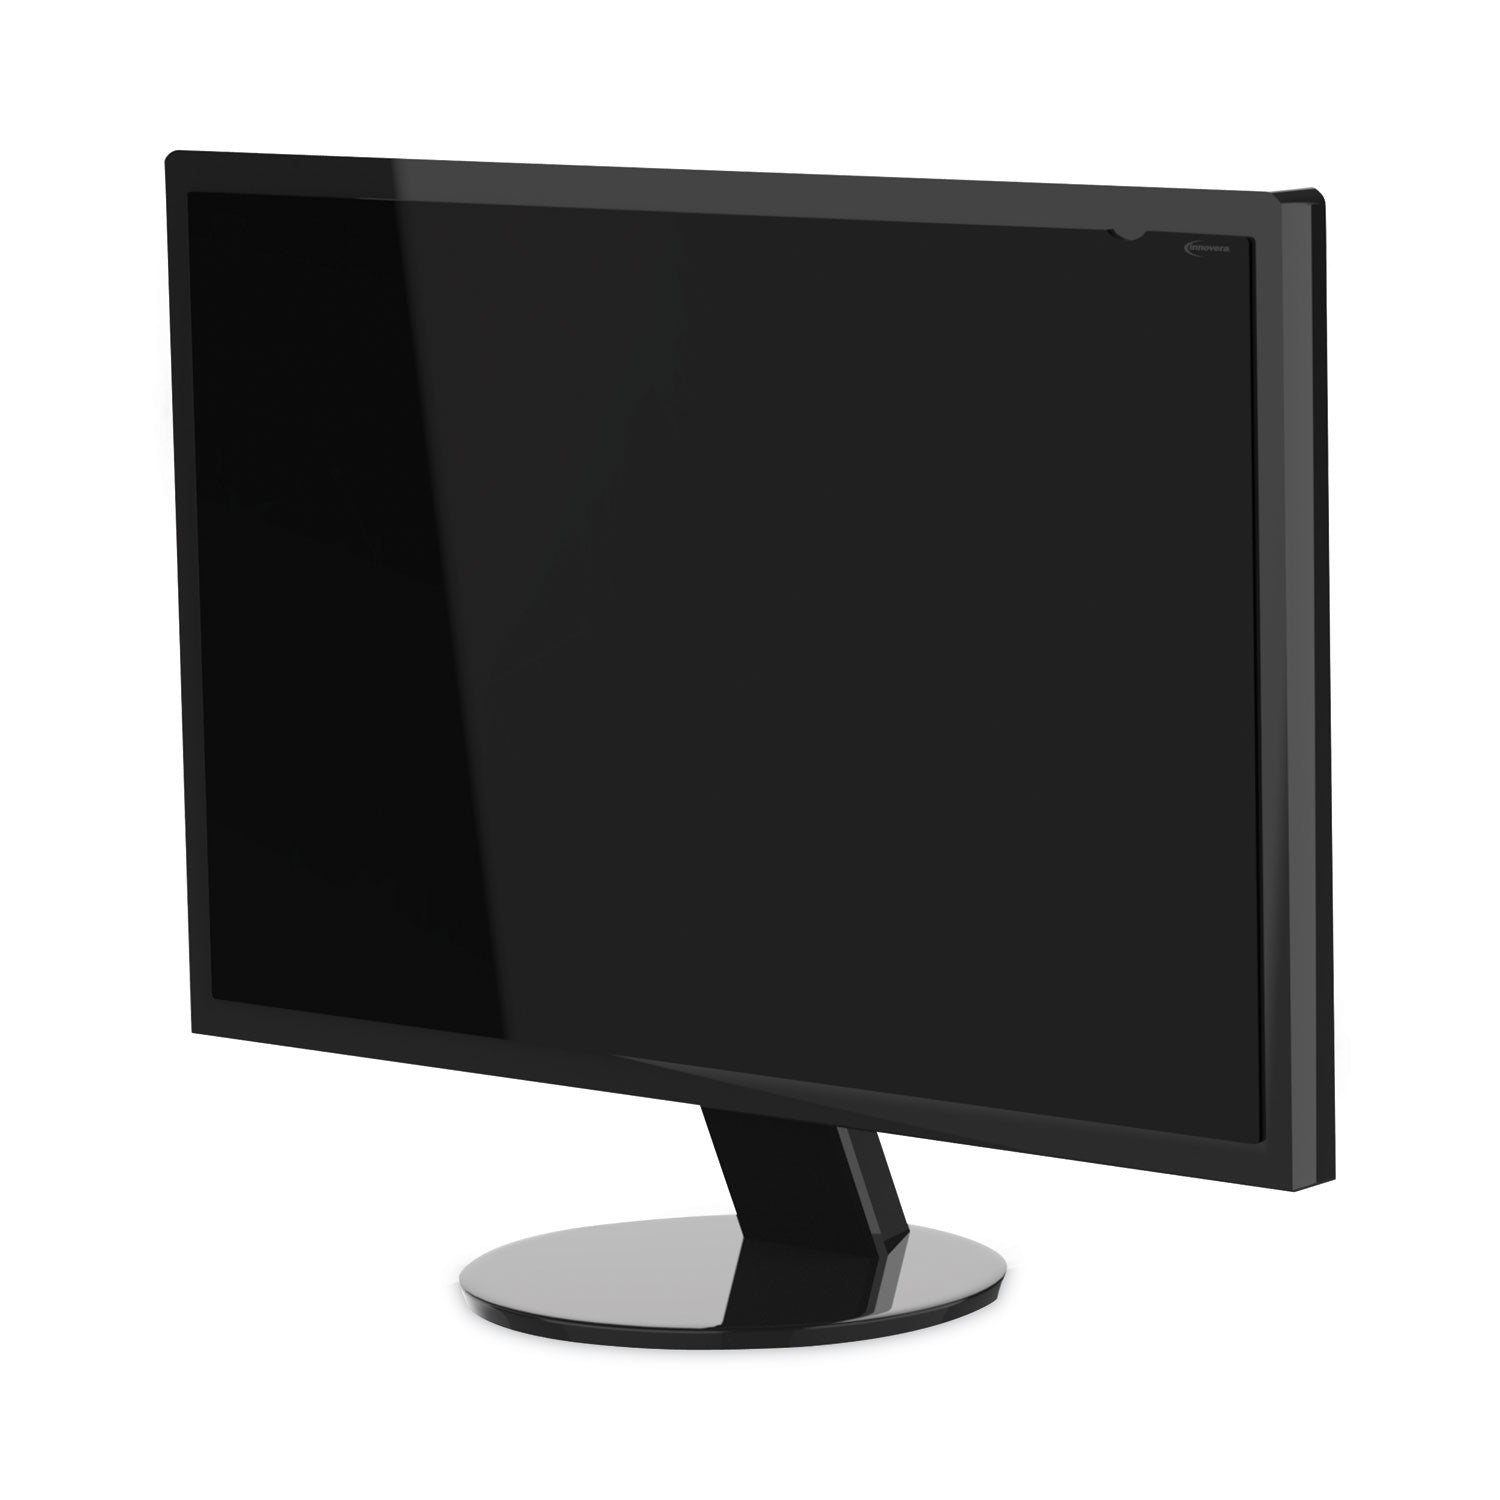 blackout-privacy-filter-for-30-widescreen-flat-panel-monitor-1610-aspect-ratio_ivrblf30w - 5